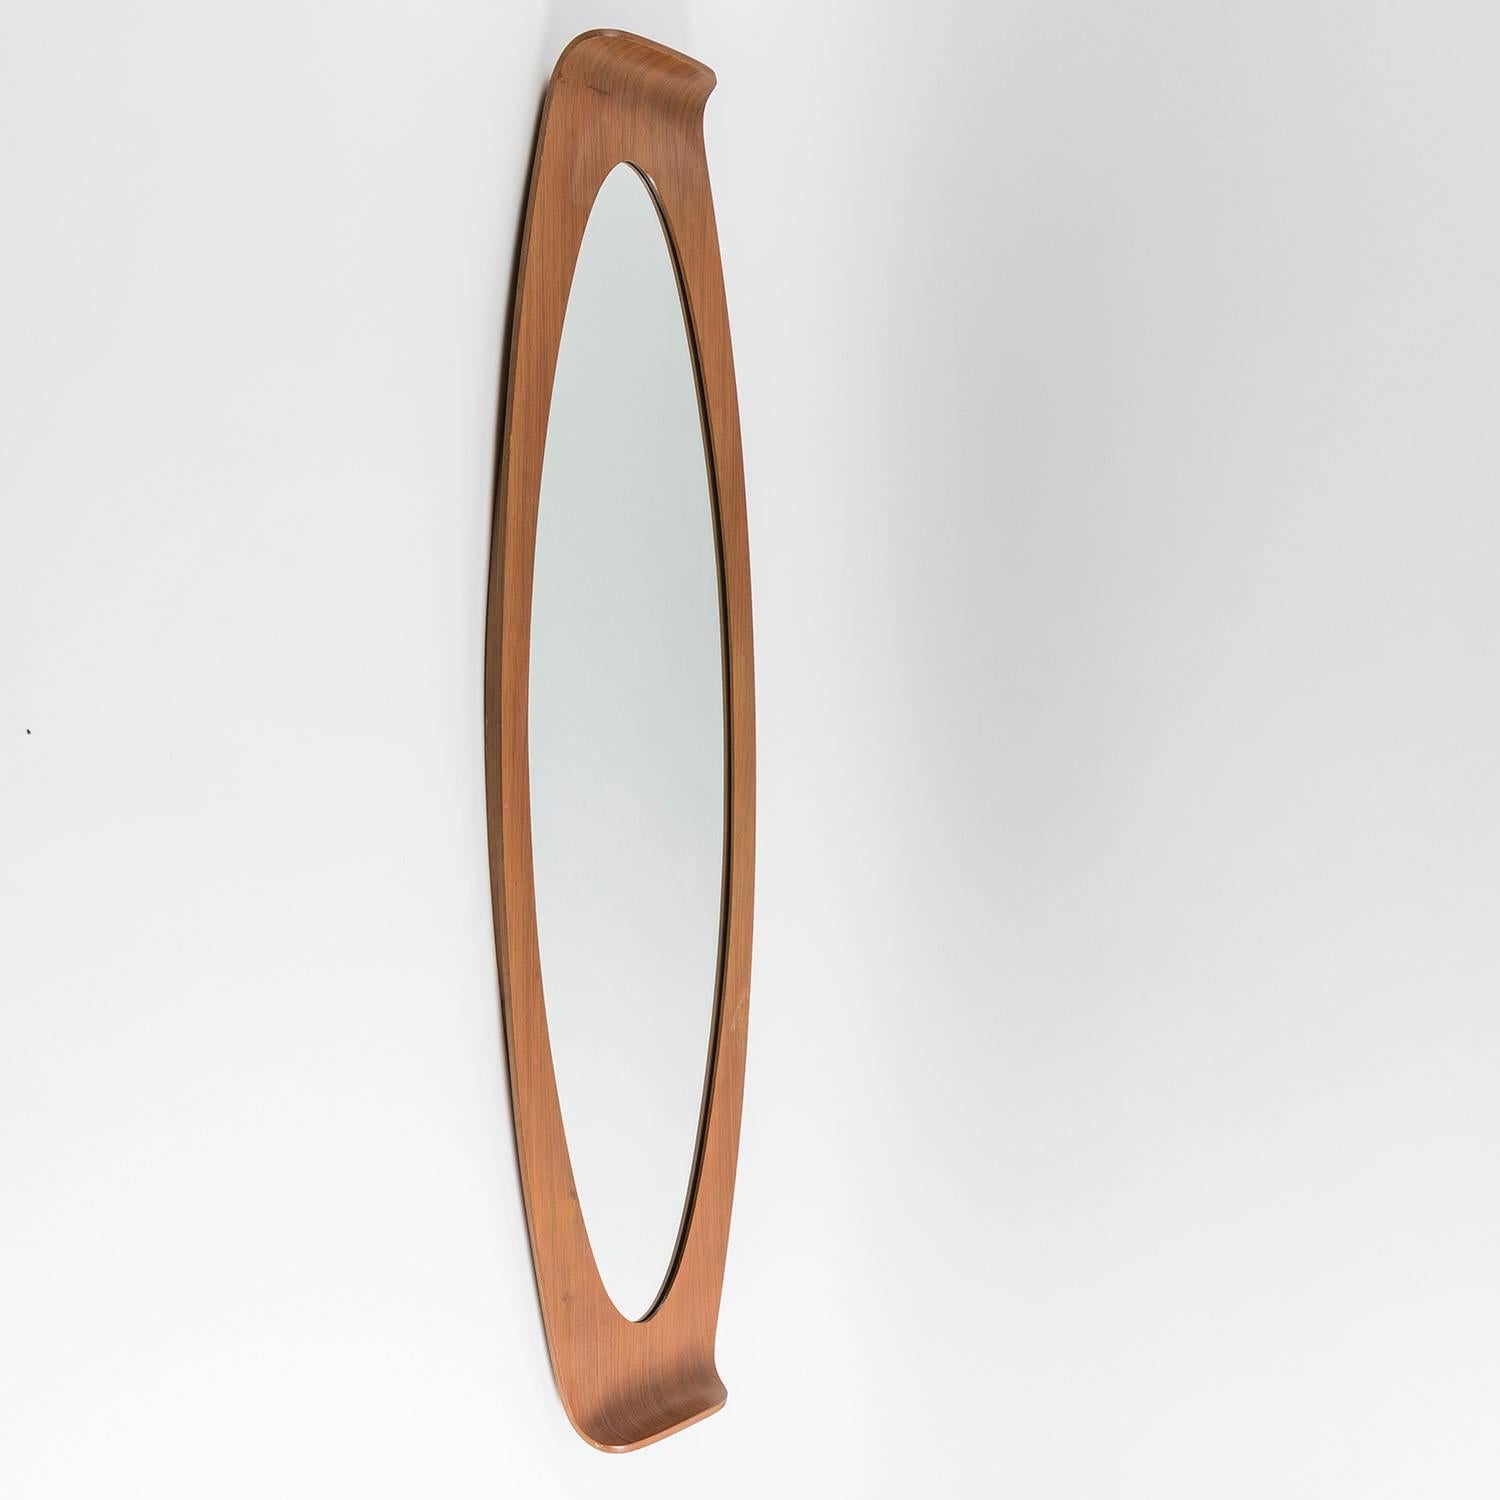 Remarkable wall mirror attributed to Franco Campo and Carlo Graffi for Home. 
Large plywood frame bent on both sides.